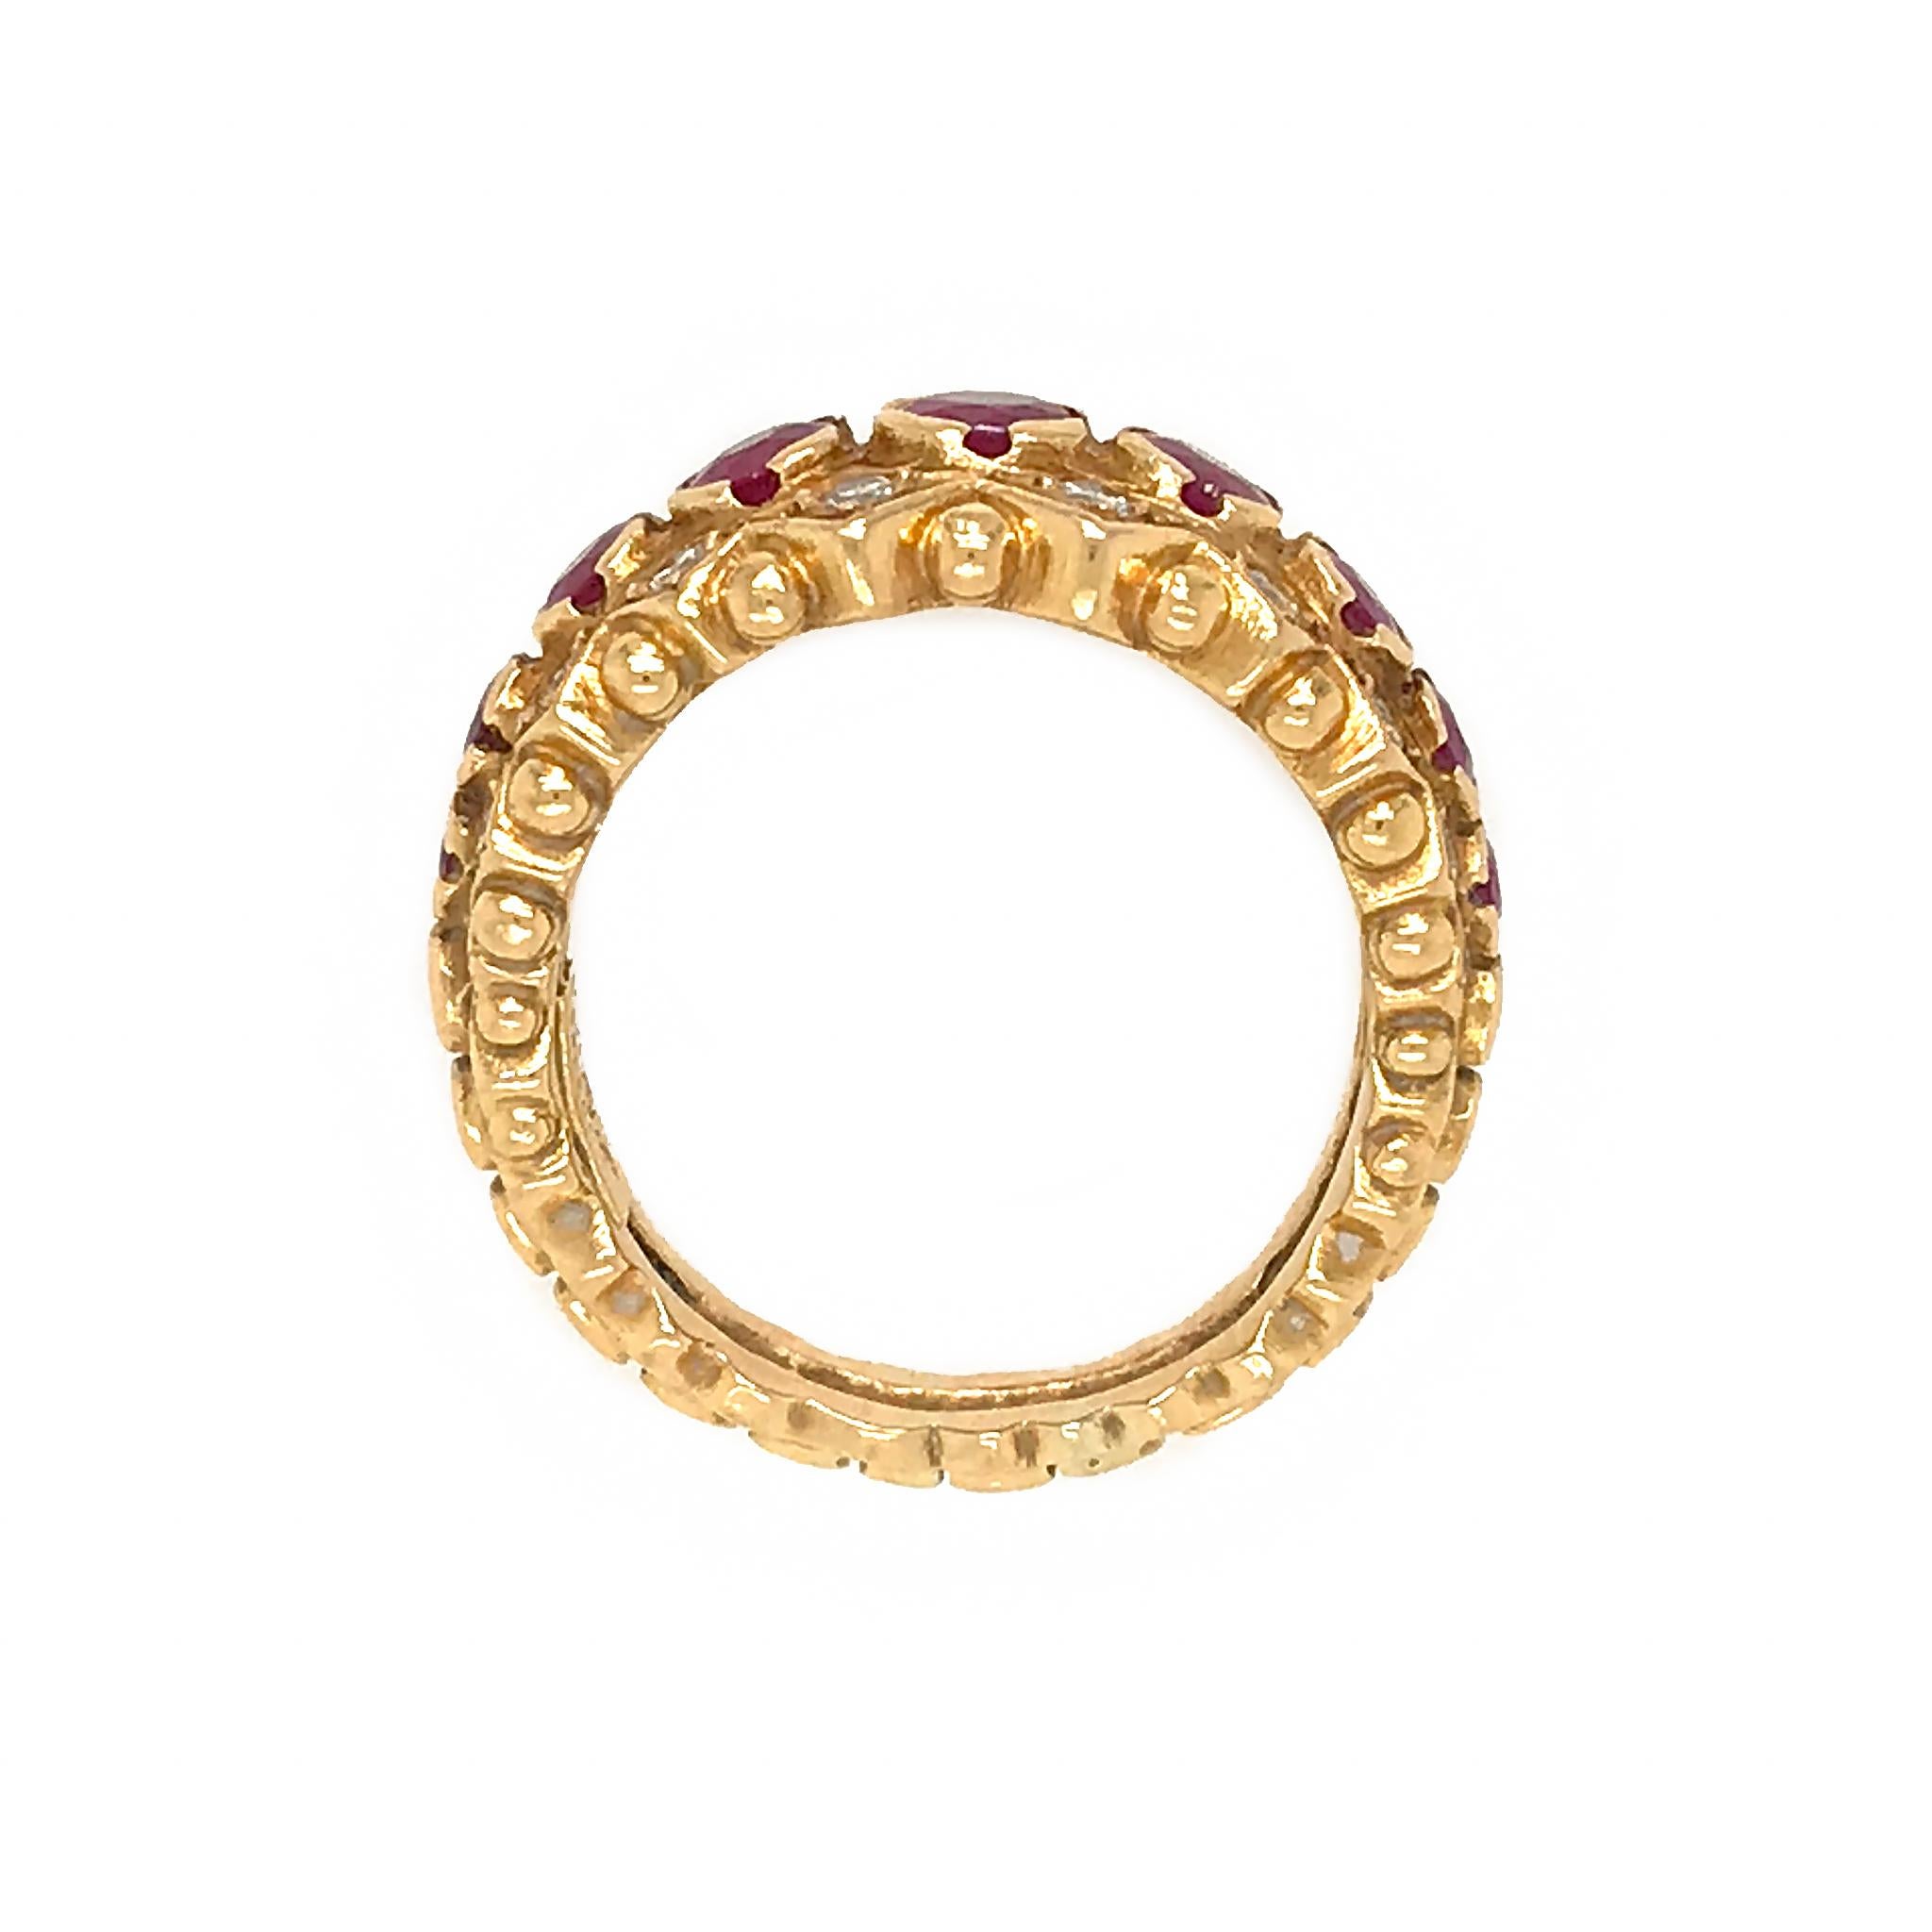 18k Yellow Gold
Ruby: 0.72 ct tw
Diamond: 0.30 ct twd
Ring Size: 7.75
Total Weight: 12 grams